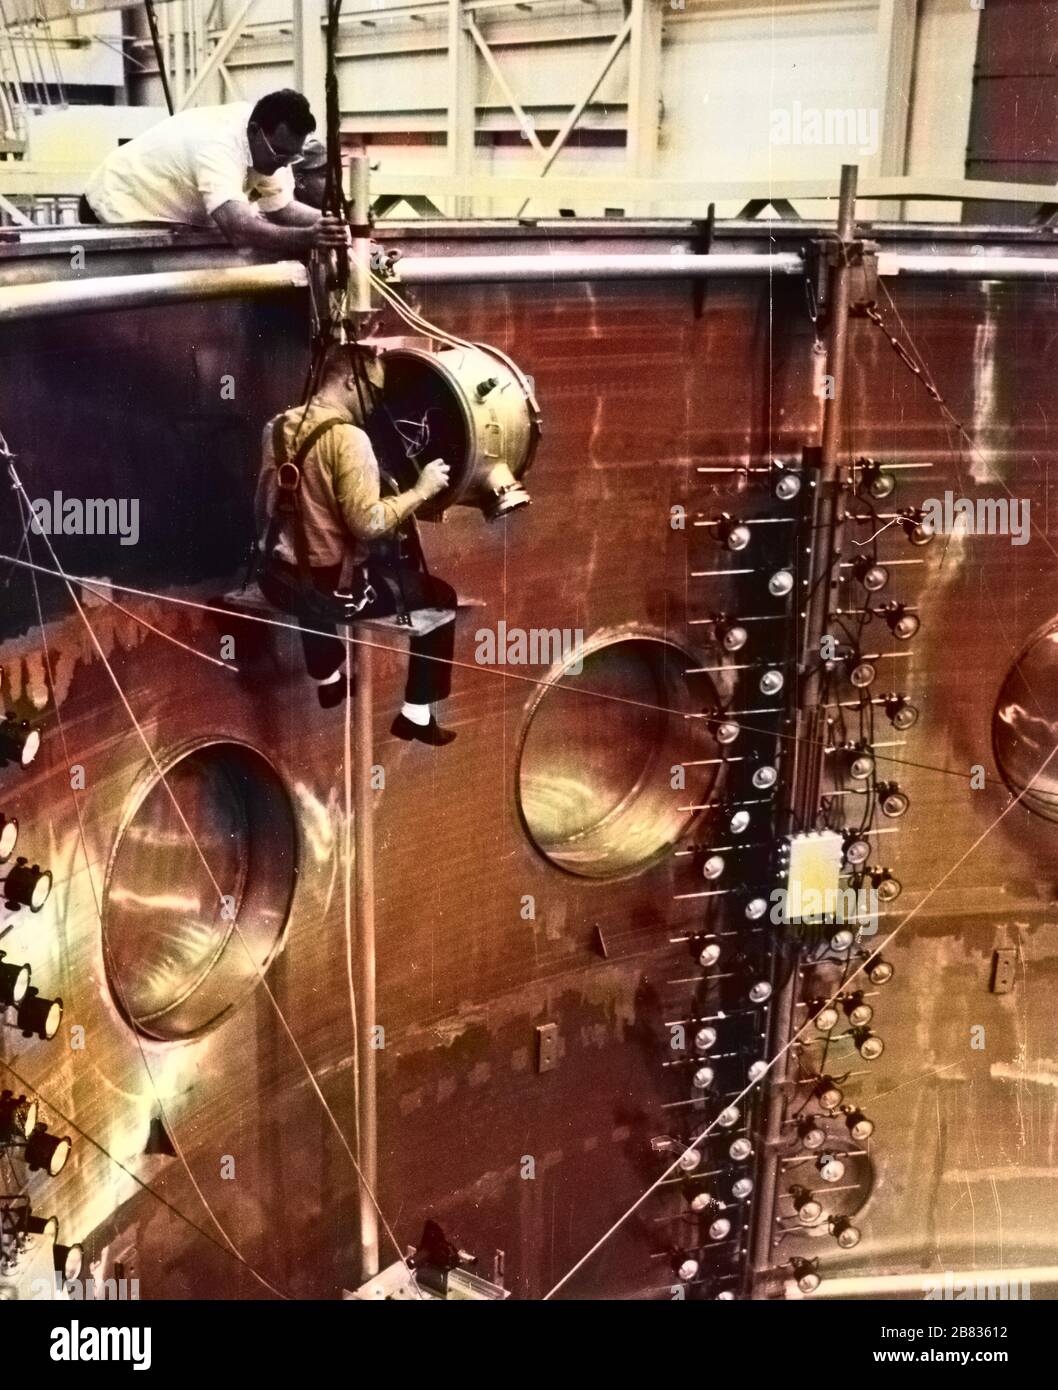 NASA photographers assembling a camera system inside the dynamic test chamber at the Goddard Space Flight Center, Greenbelt, Maryland, 1964. Image courtesy National Aeronautics and Space Administration (NASA). Note: Image has been digitally colorized using a modern process. Colors may not be period-accurate. () Stock Photo